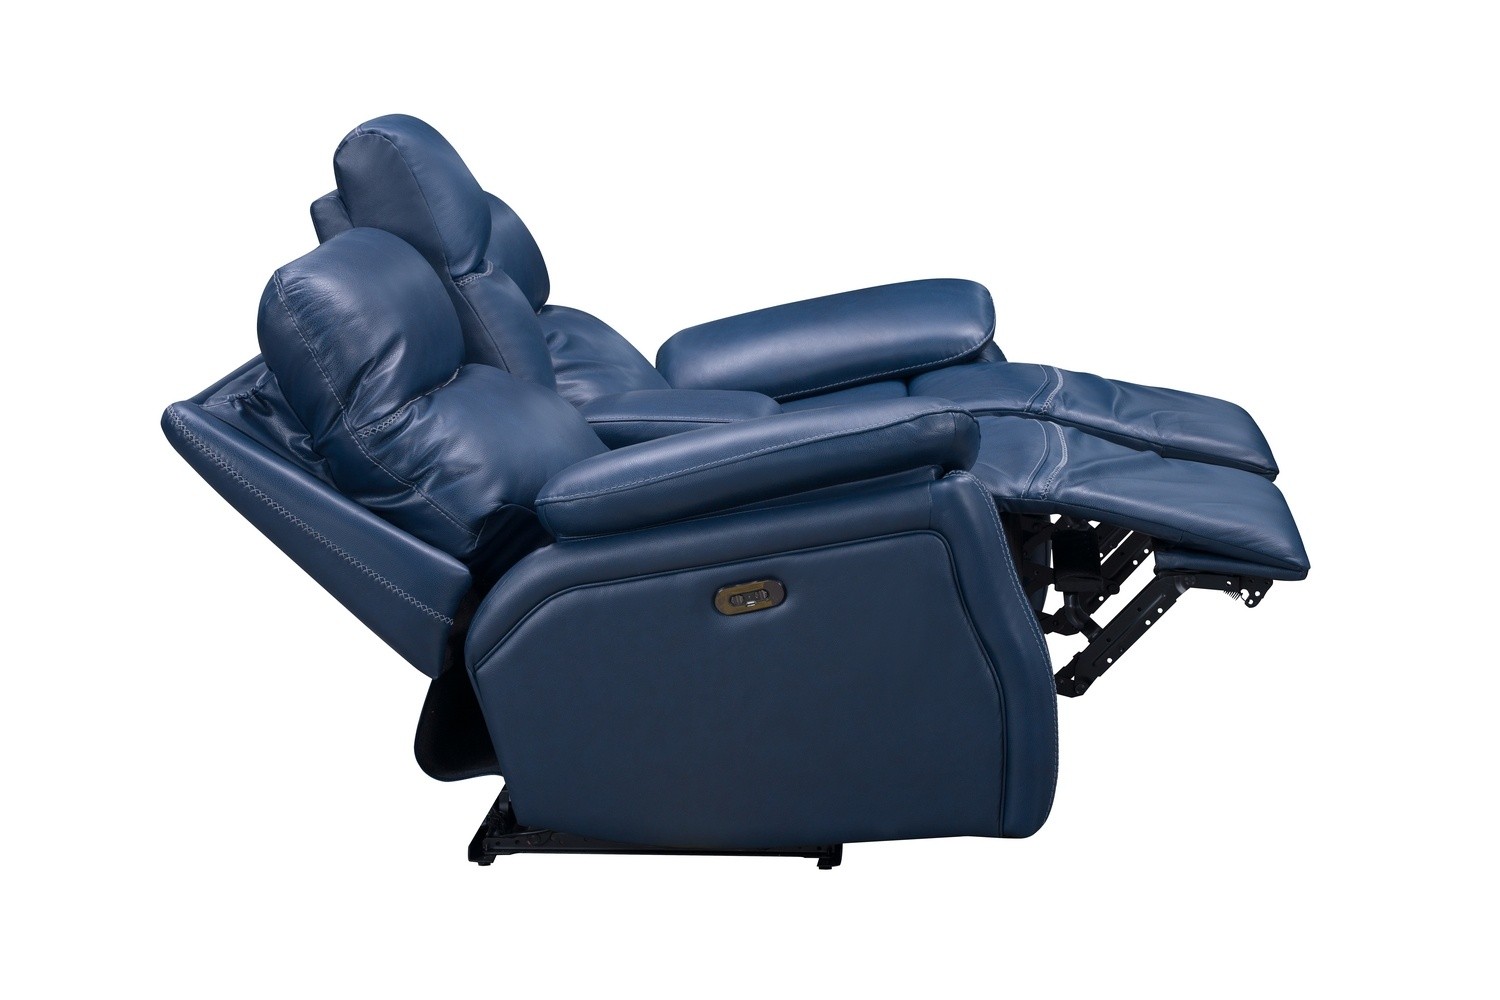 Barcalounger Micah Console Loveseat with Power Recline and Power Head Rests - Marco Navy Blue/Leather Match